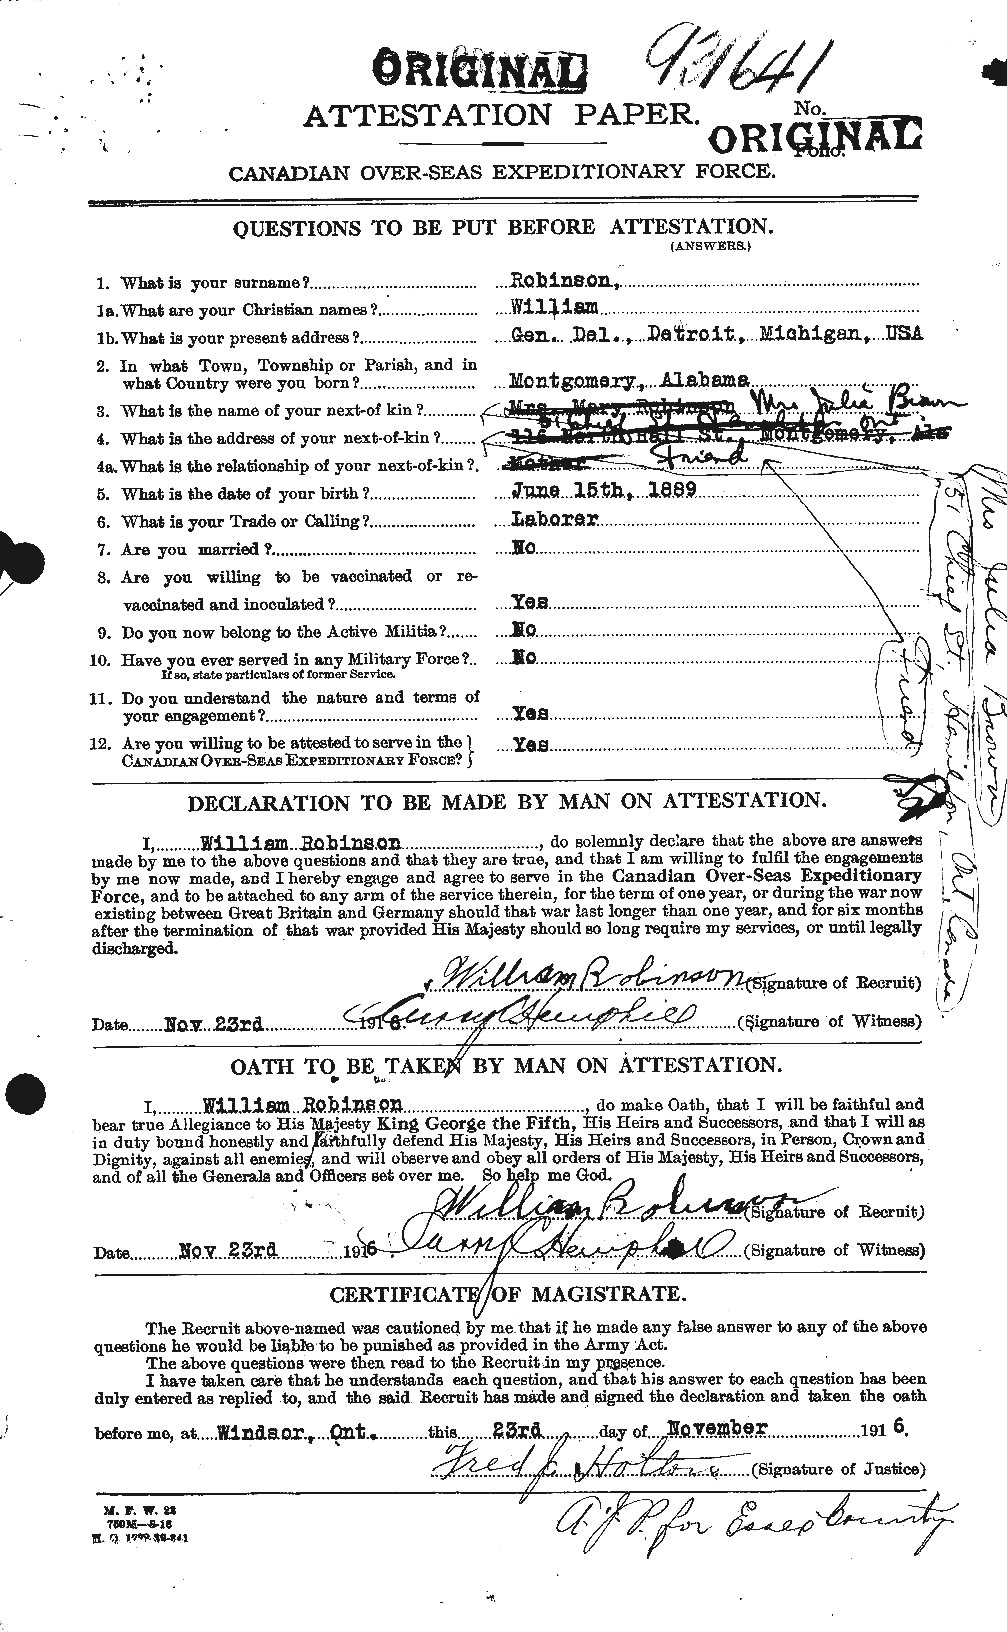 Personnel Records of the First World War - CEF 613950a